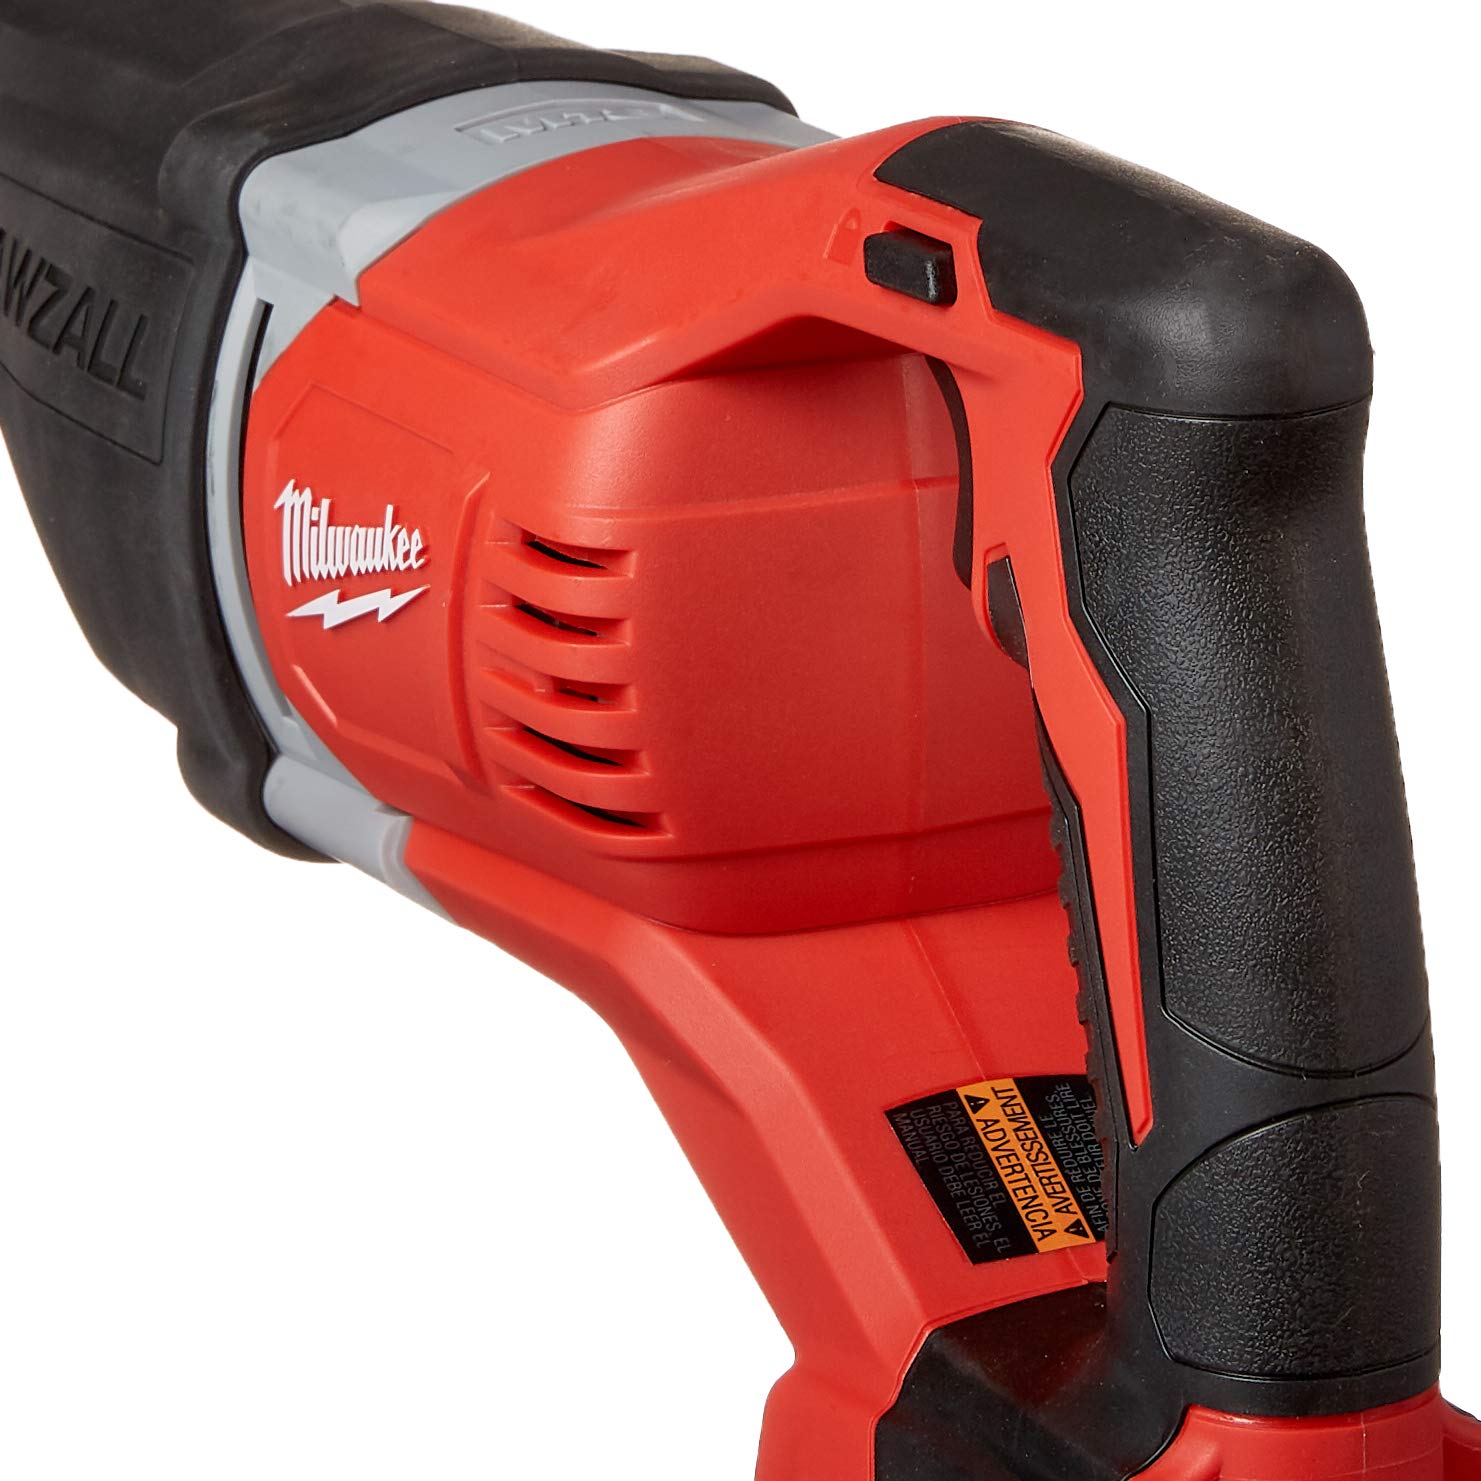 Milwaukee 2621-20 M18 18V Lithium Ion Cordless Sawzall 3,000RPM  Reciprocating Saw with Quik Lok Blade Clamp and All Metal Gearbox (Bare Tool) 